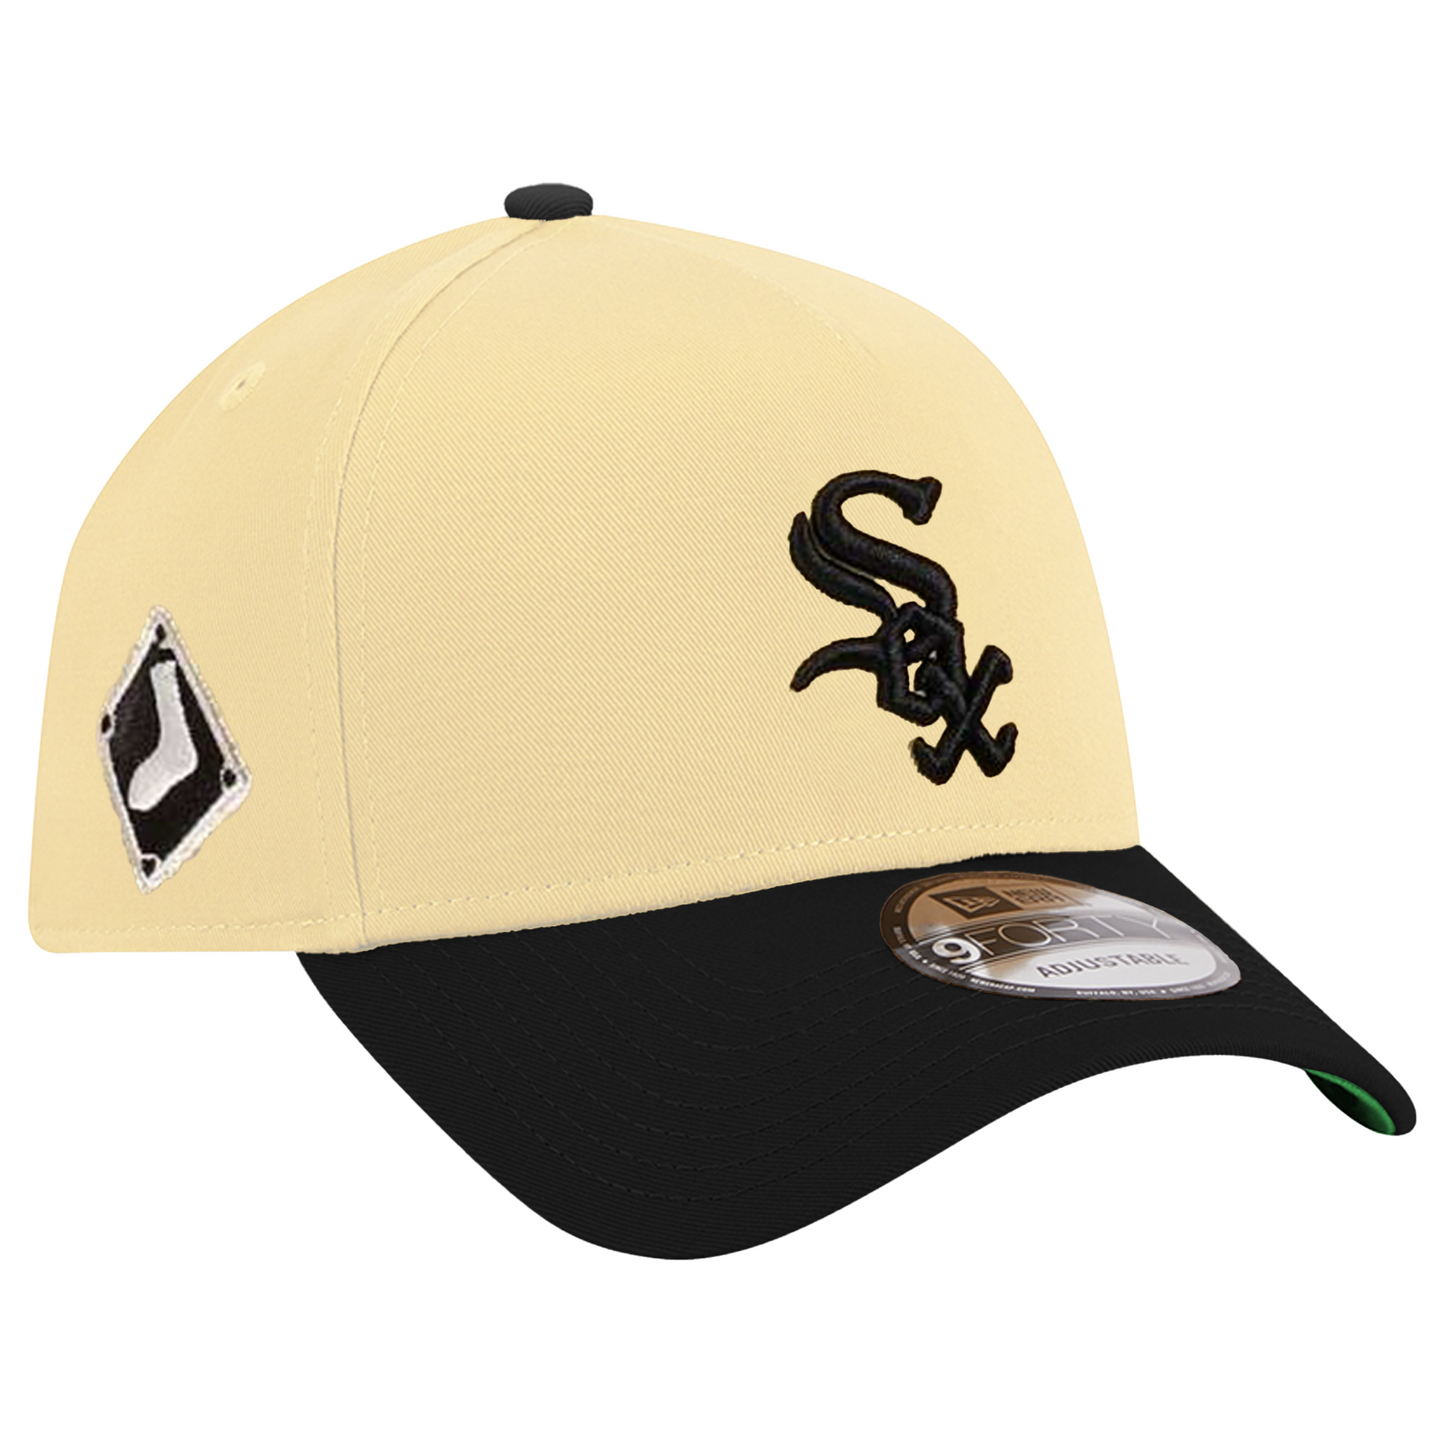 New Era 9FORTY Chicago White Sox Sidepatch Snapback